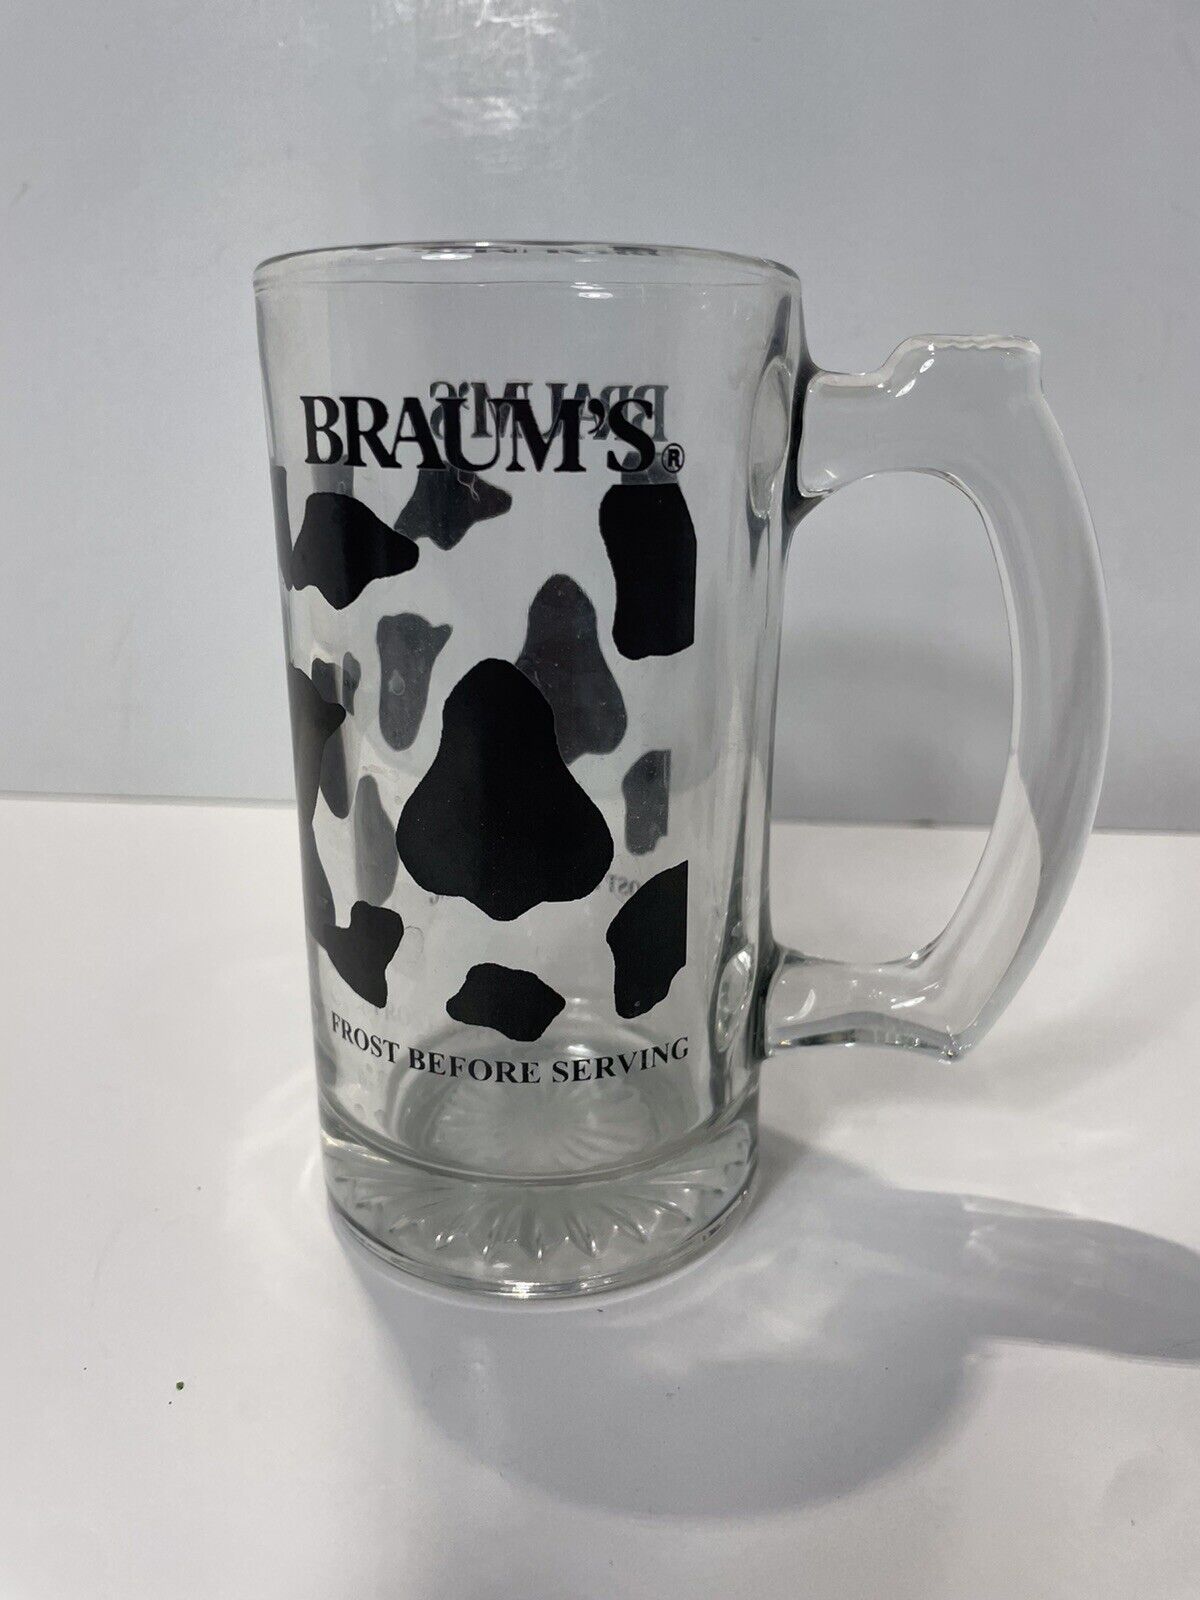 Braum’s Ice Cream Glass Mug Frost Before Serving Cow Spots Root Beer